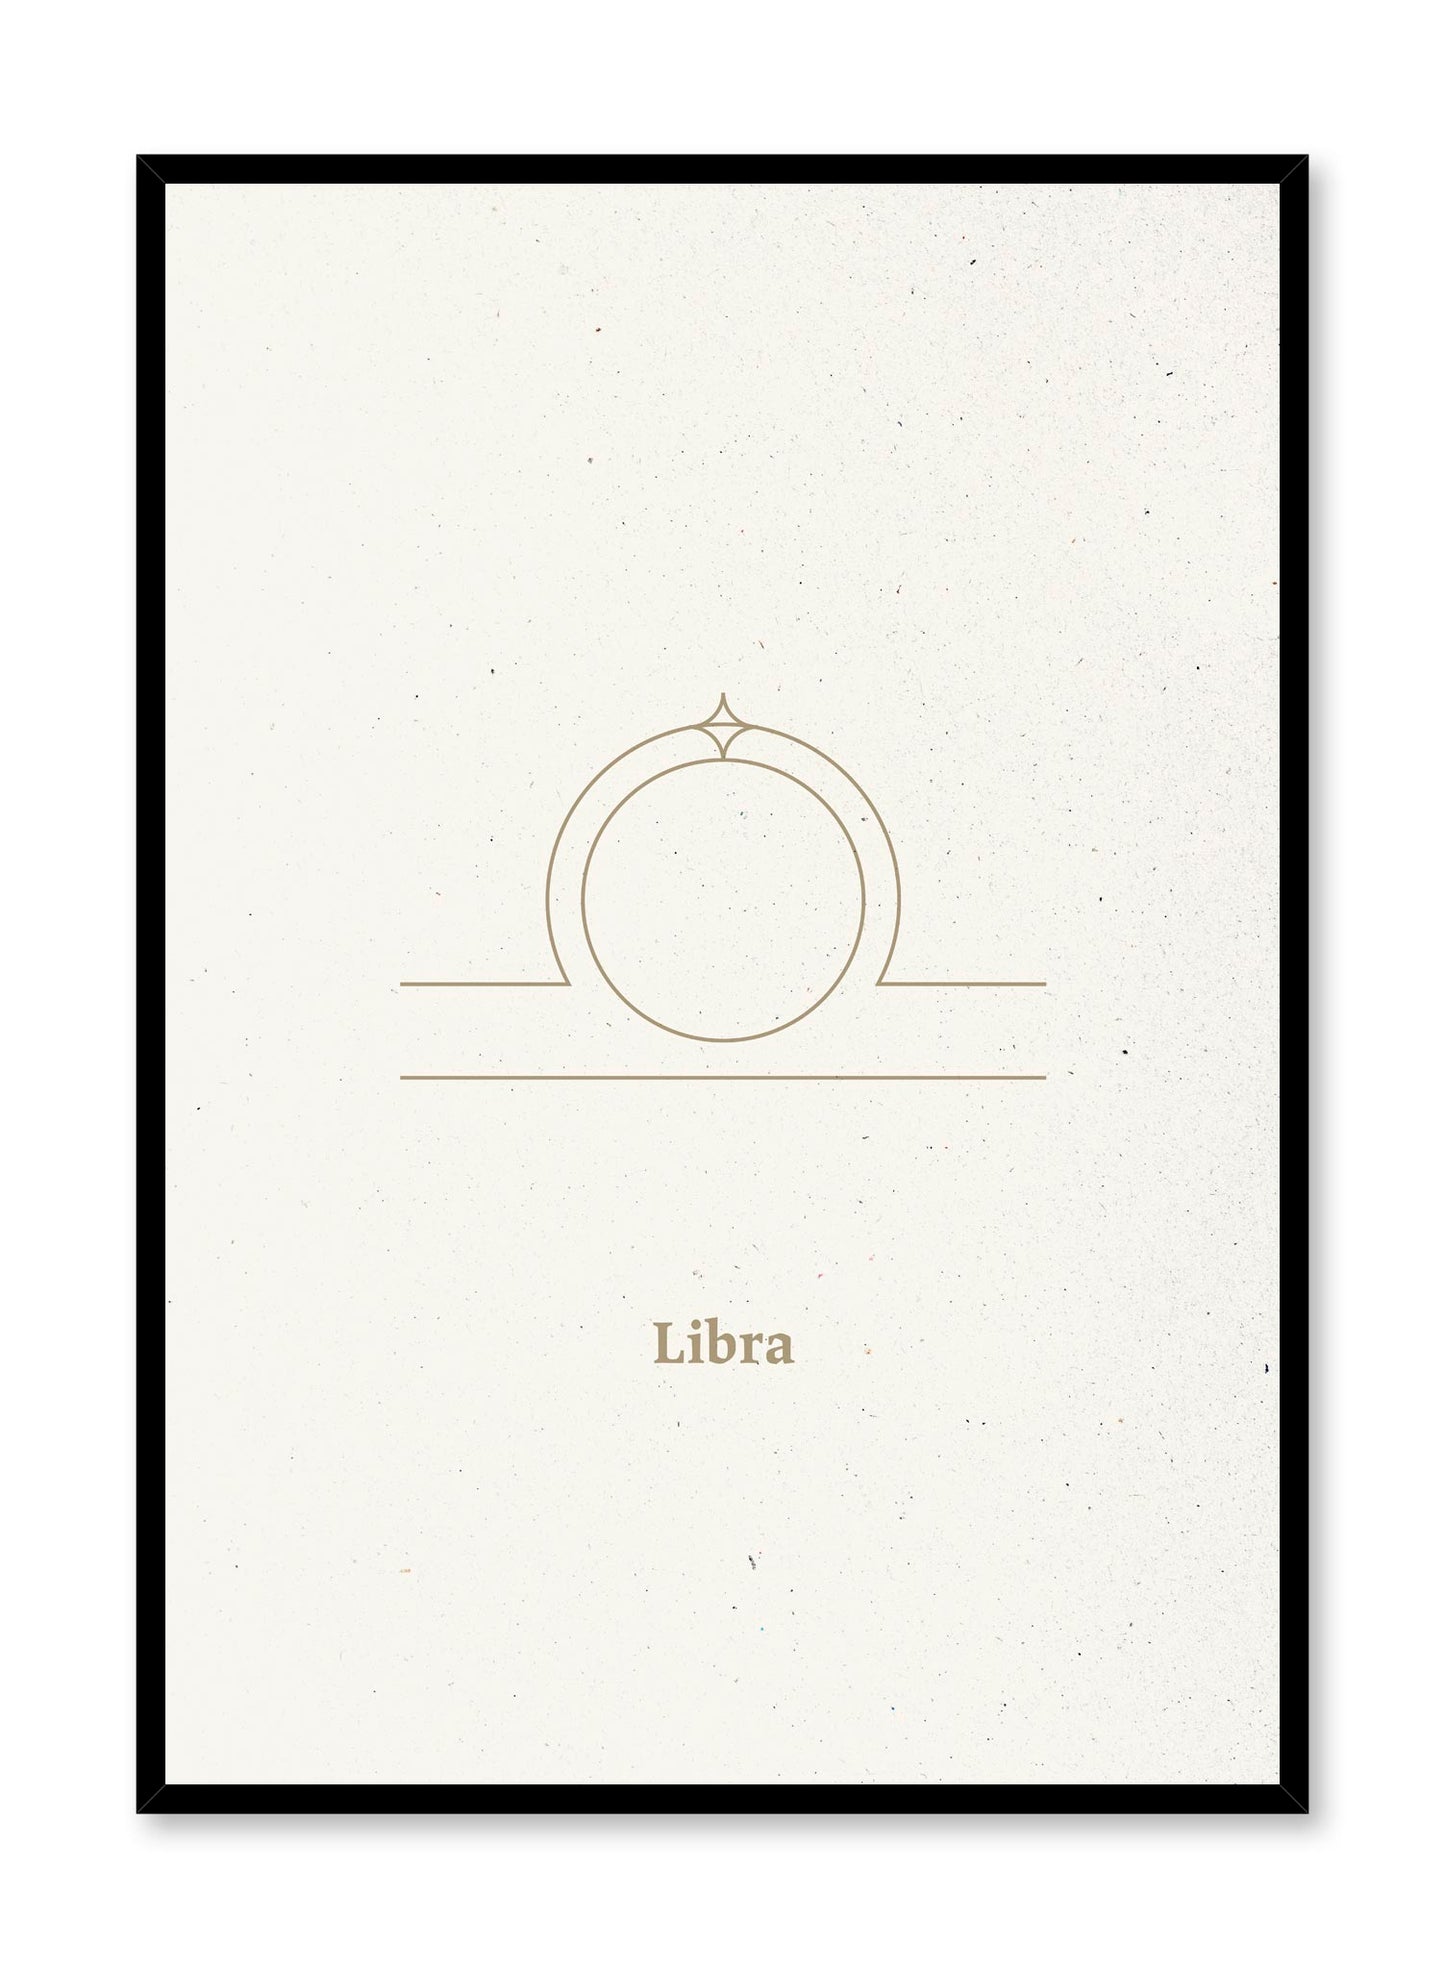 Minimalist celestial illustration poster by Opposite Wall with Libra symbol